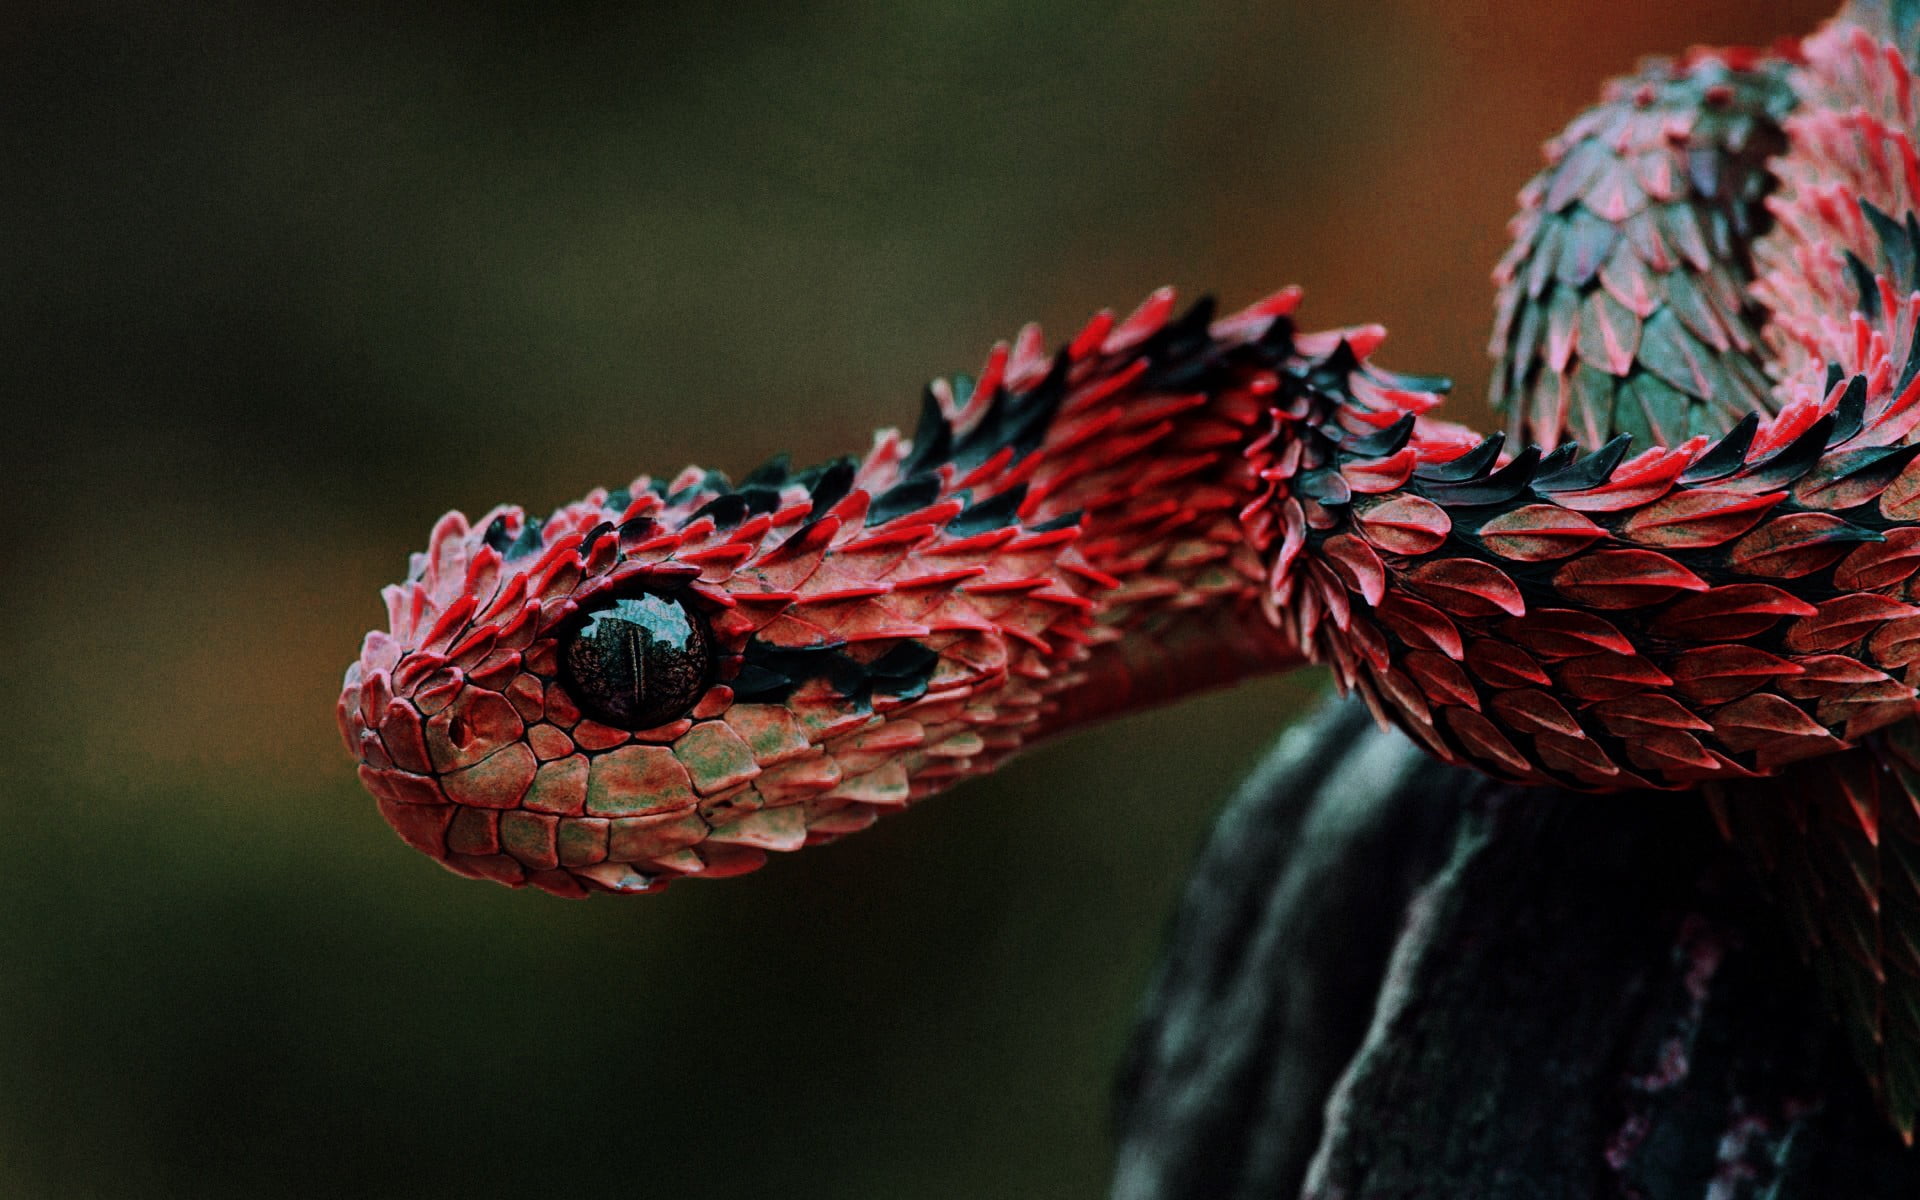 red and black snake, vipers, reptiles, Lizard scales, animals